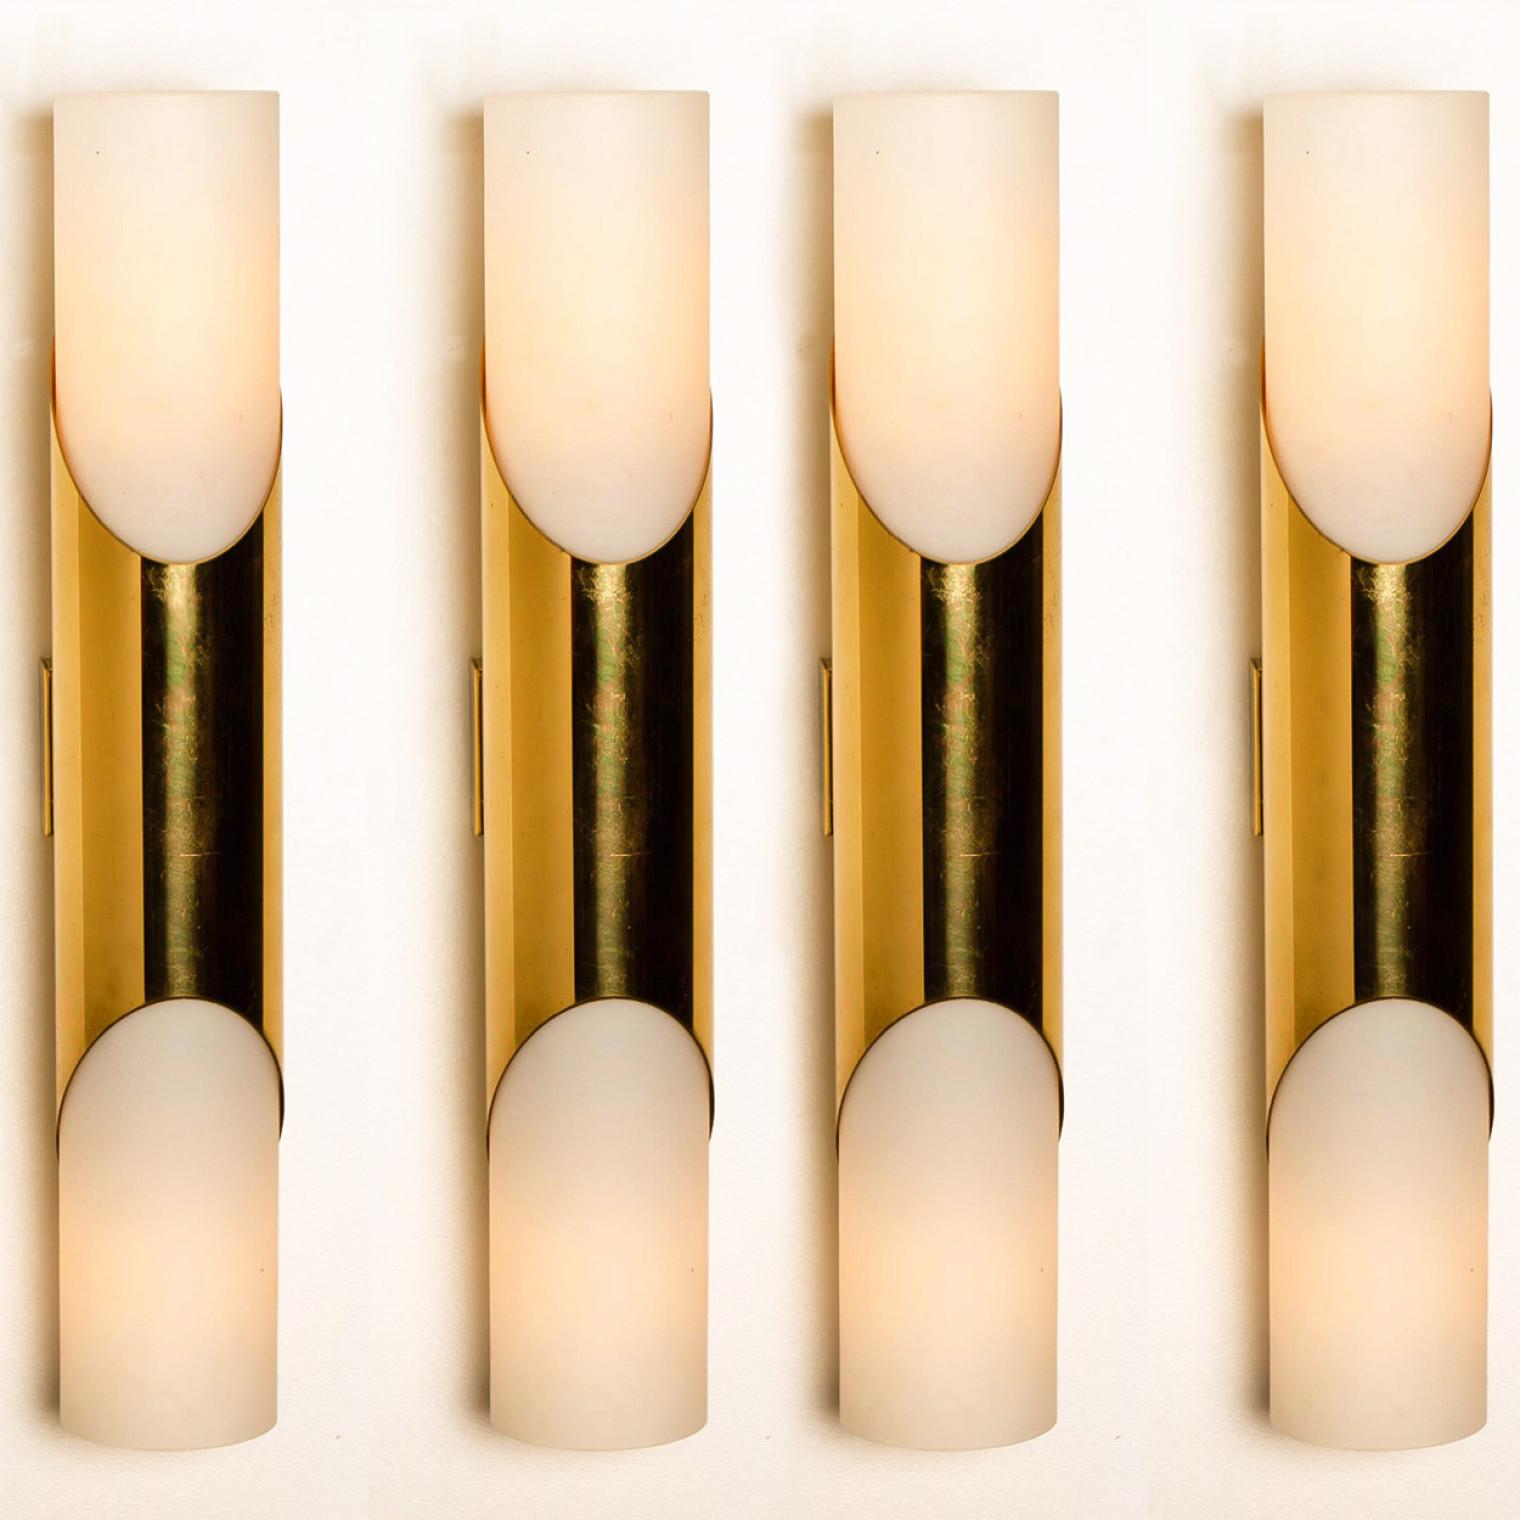 Stunning wall sconces designed in the style of RAAK. Opaline glass with brass details.
Minimalistic design executed with a taste for excellence in craftsmanship.

Good condition that means this piece is not new but in a very good vintage condition